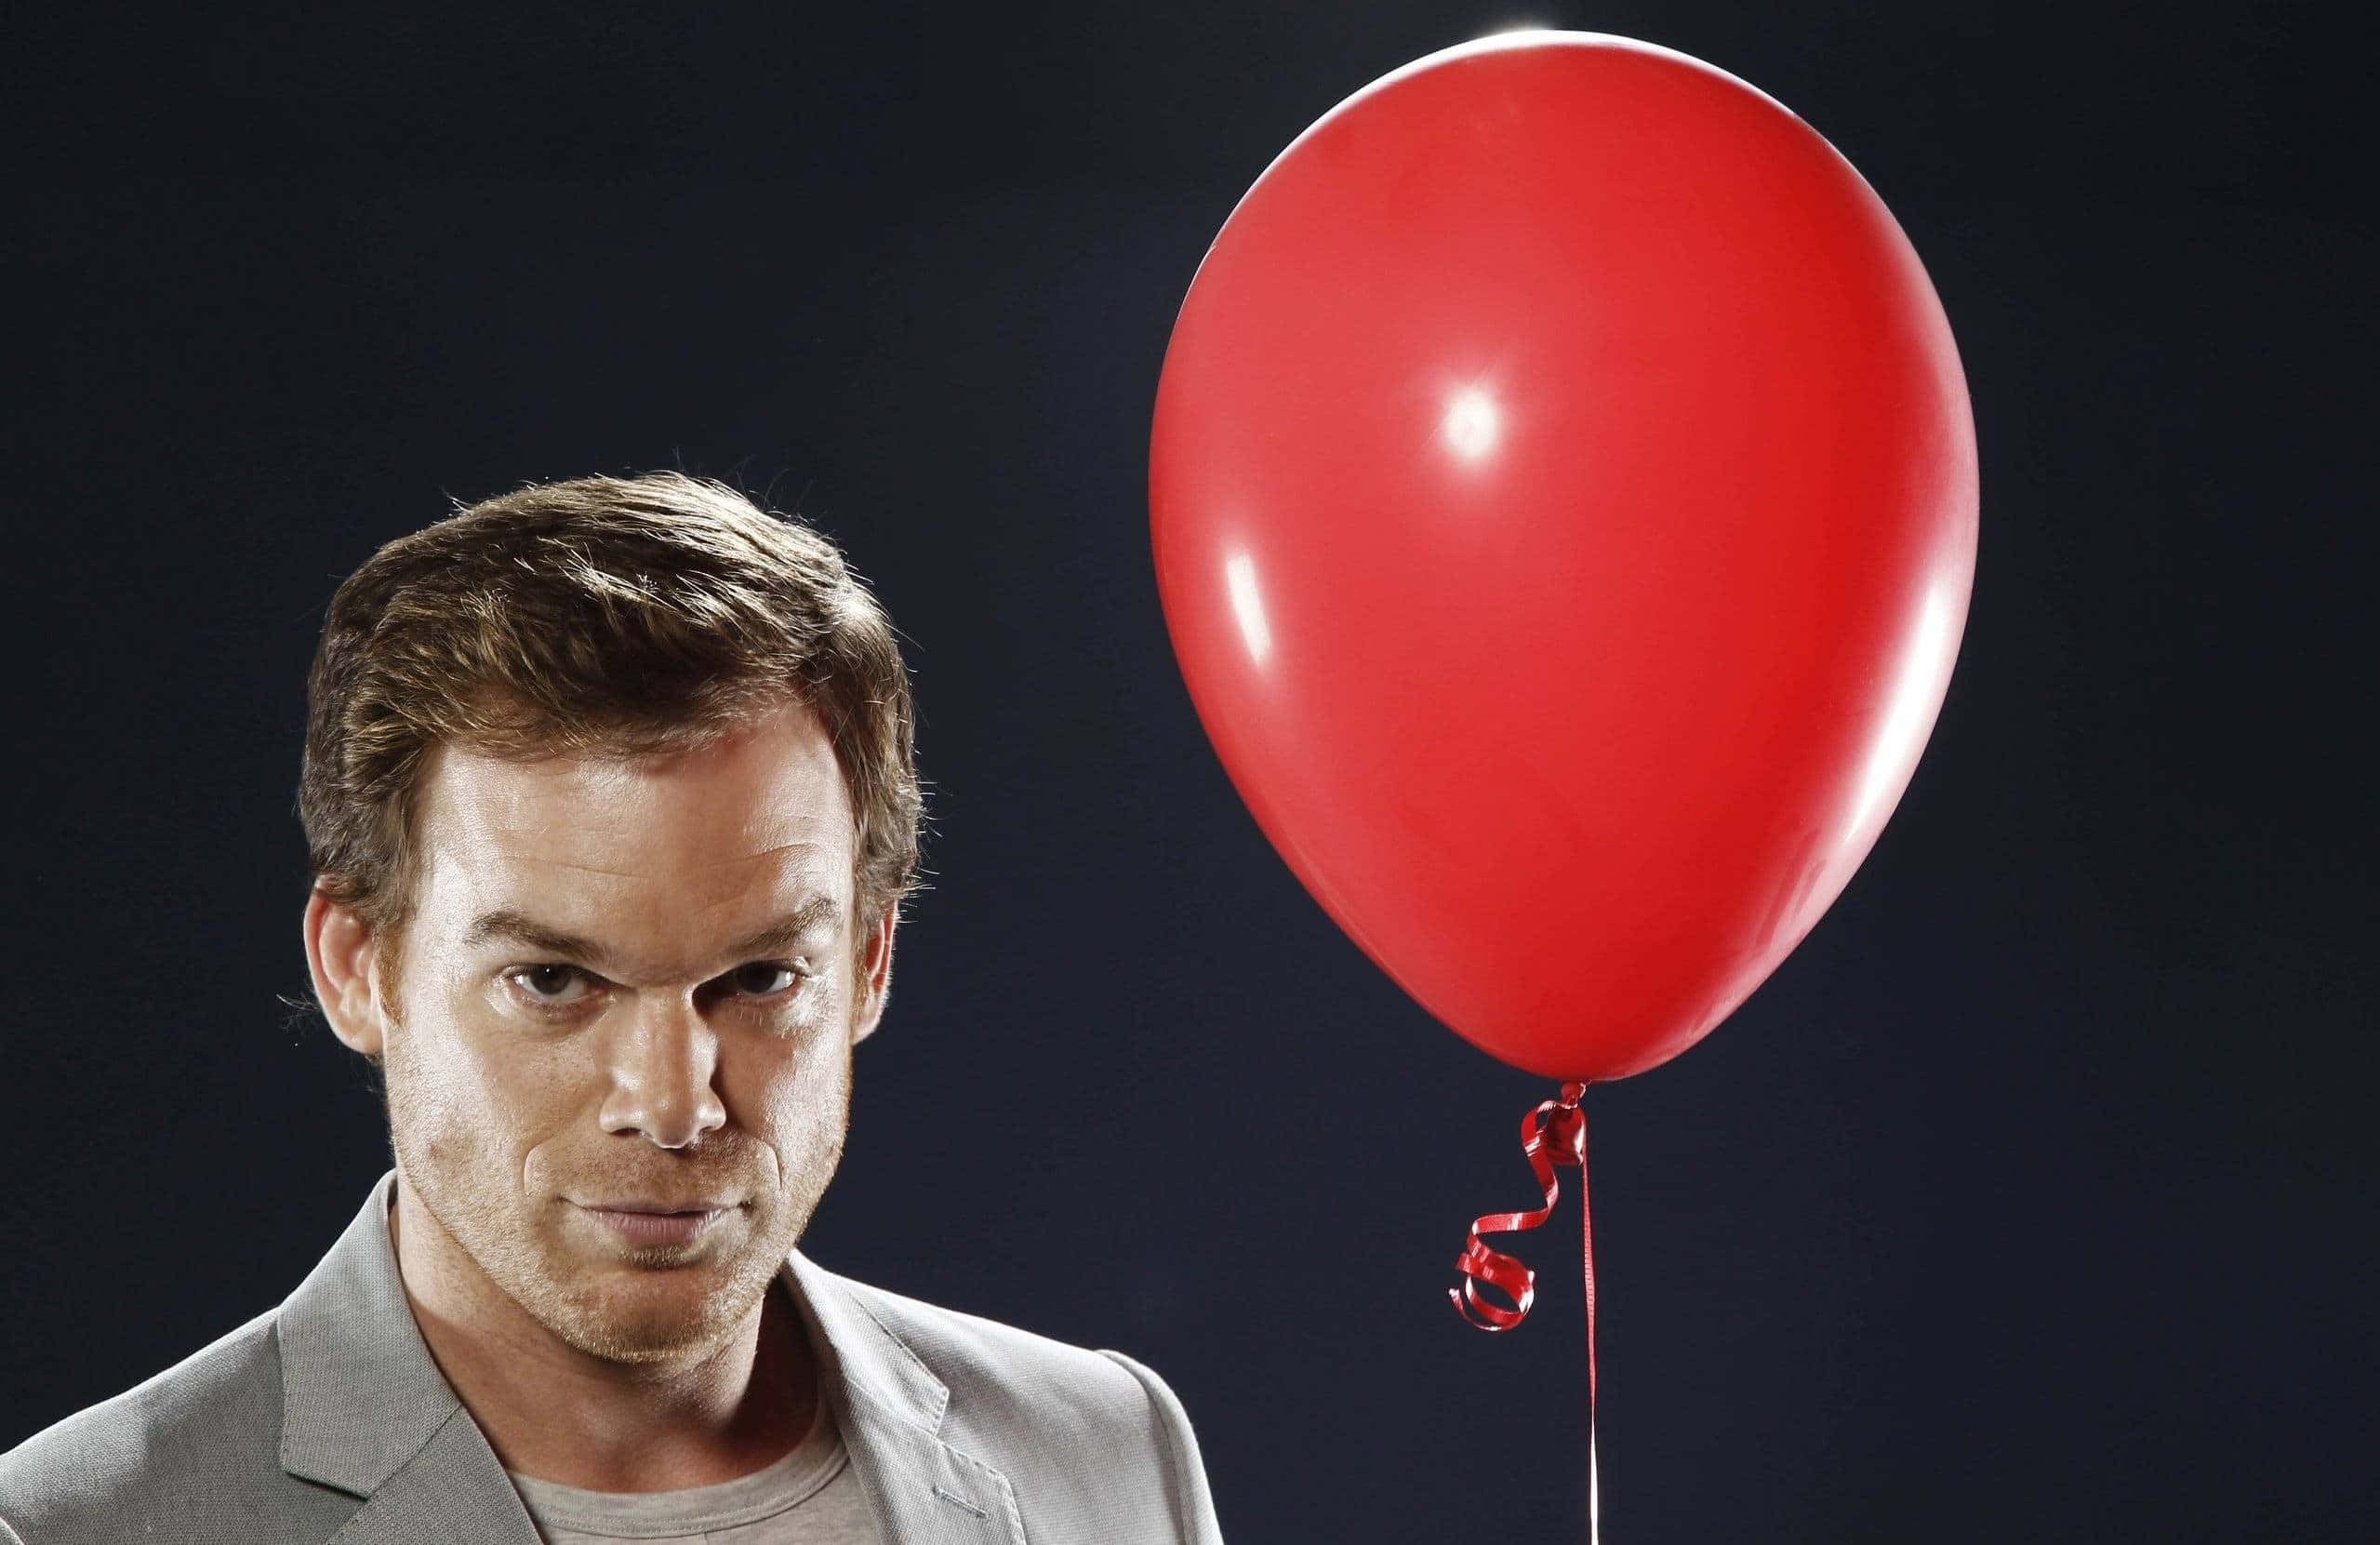 Actor Michael C. Hall In A Candid Shot. Background